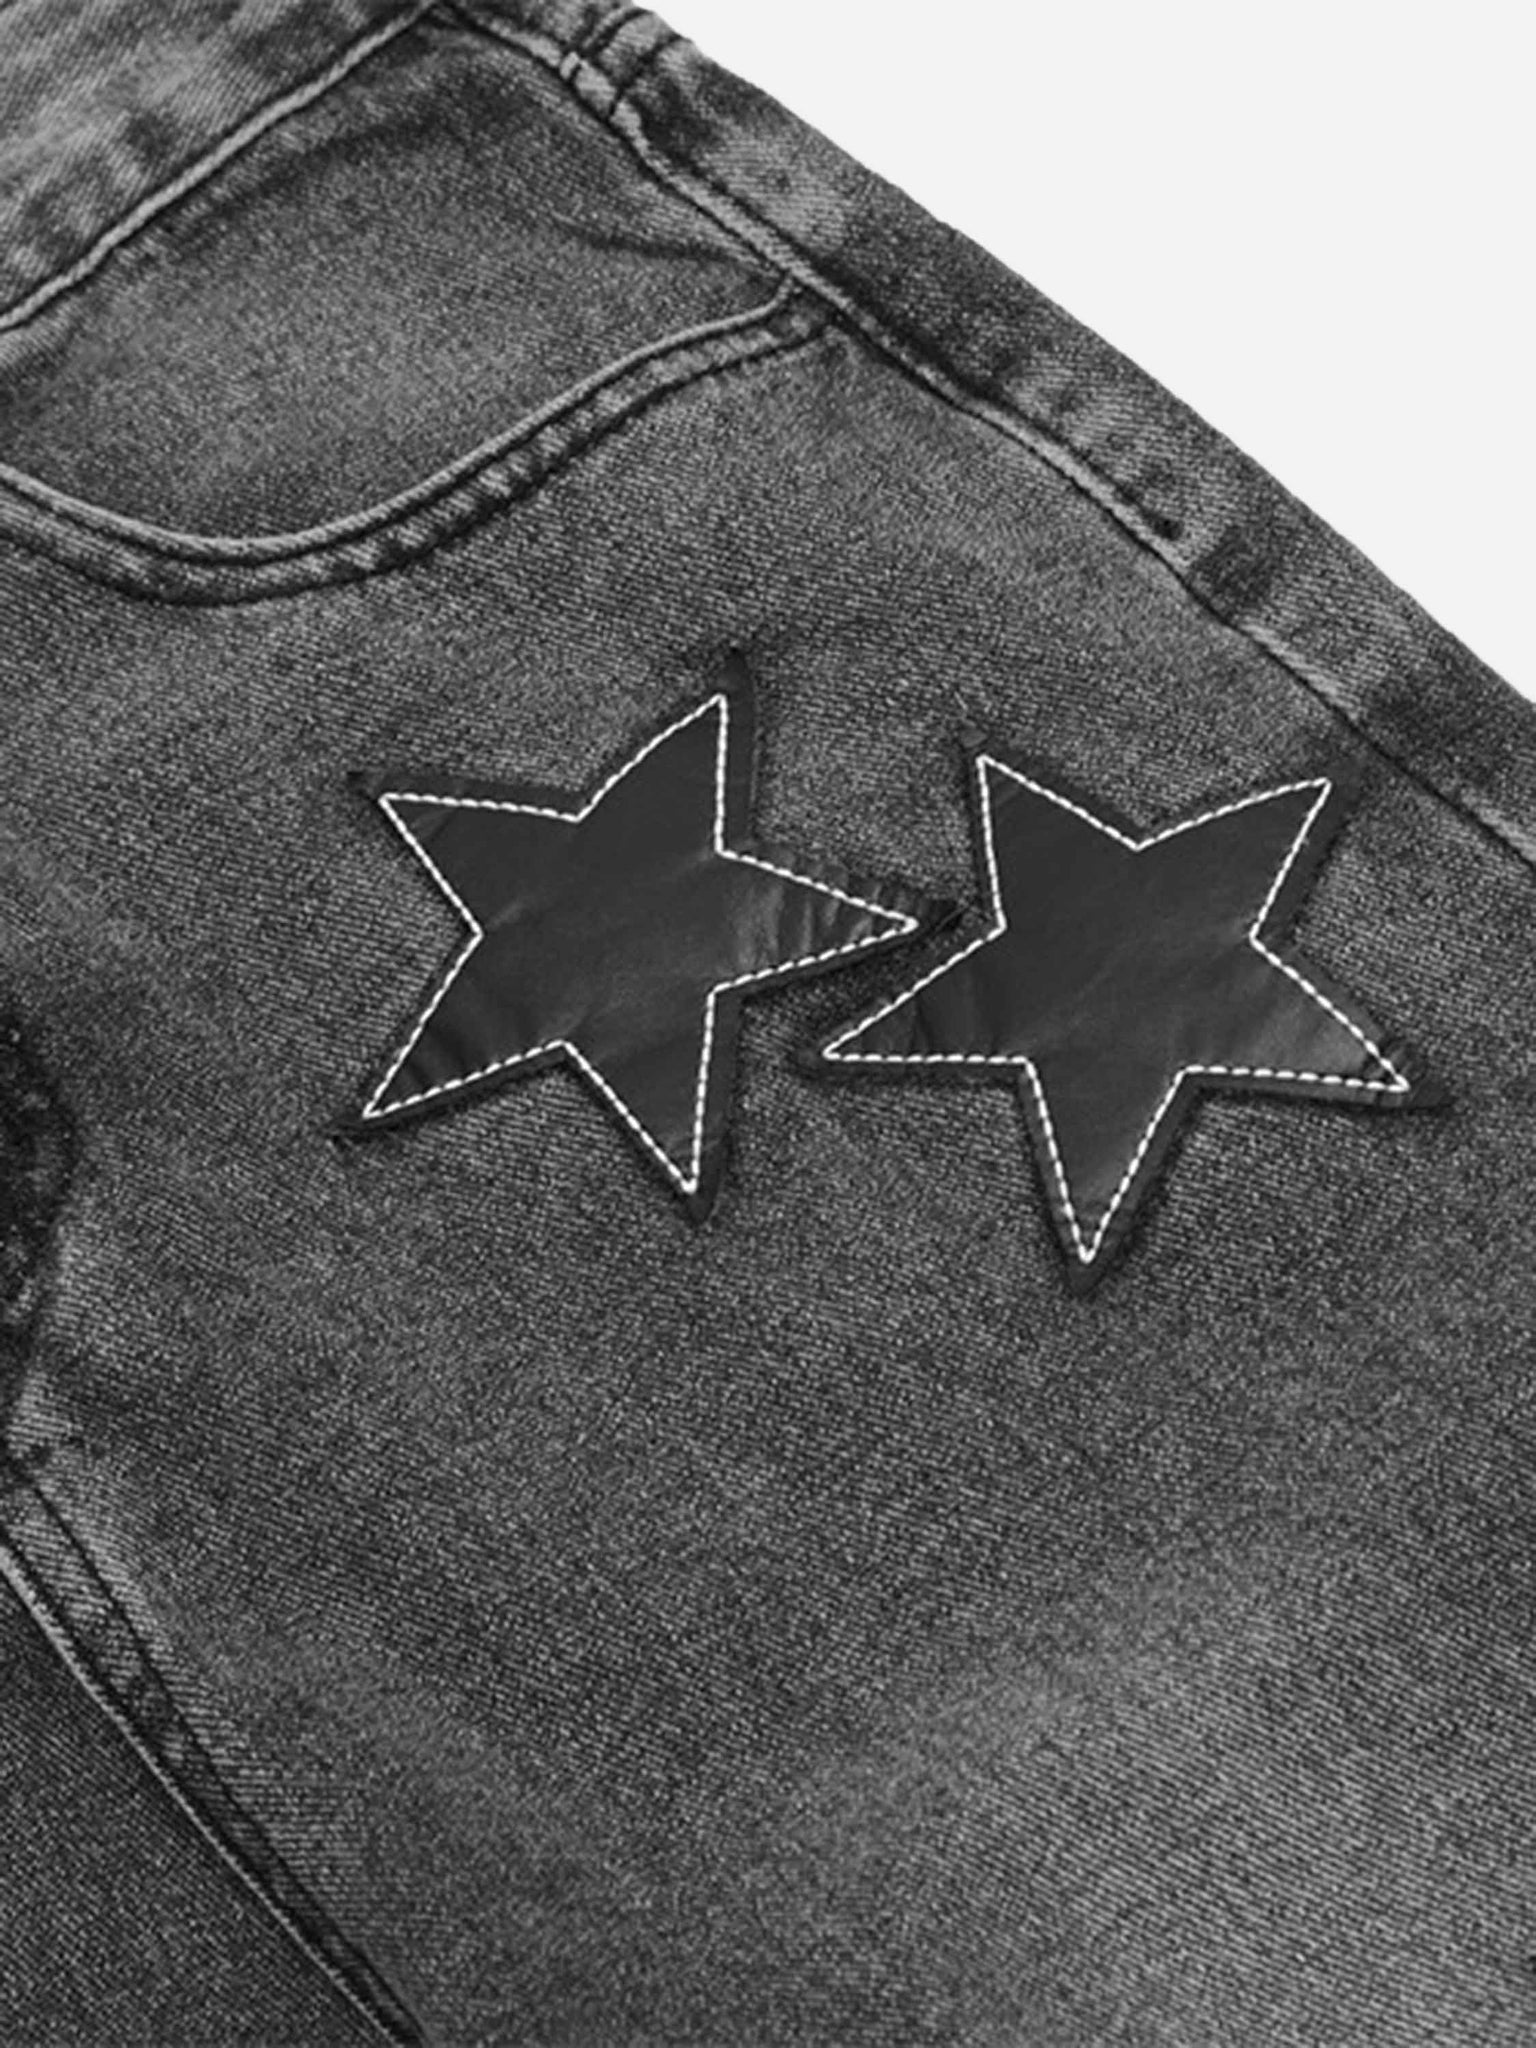 Thesupermade American Vintage Five-pointed Star Patch Embroidered Jeans Loose Straight-legged Pants -1439